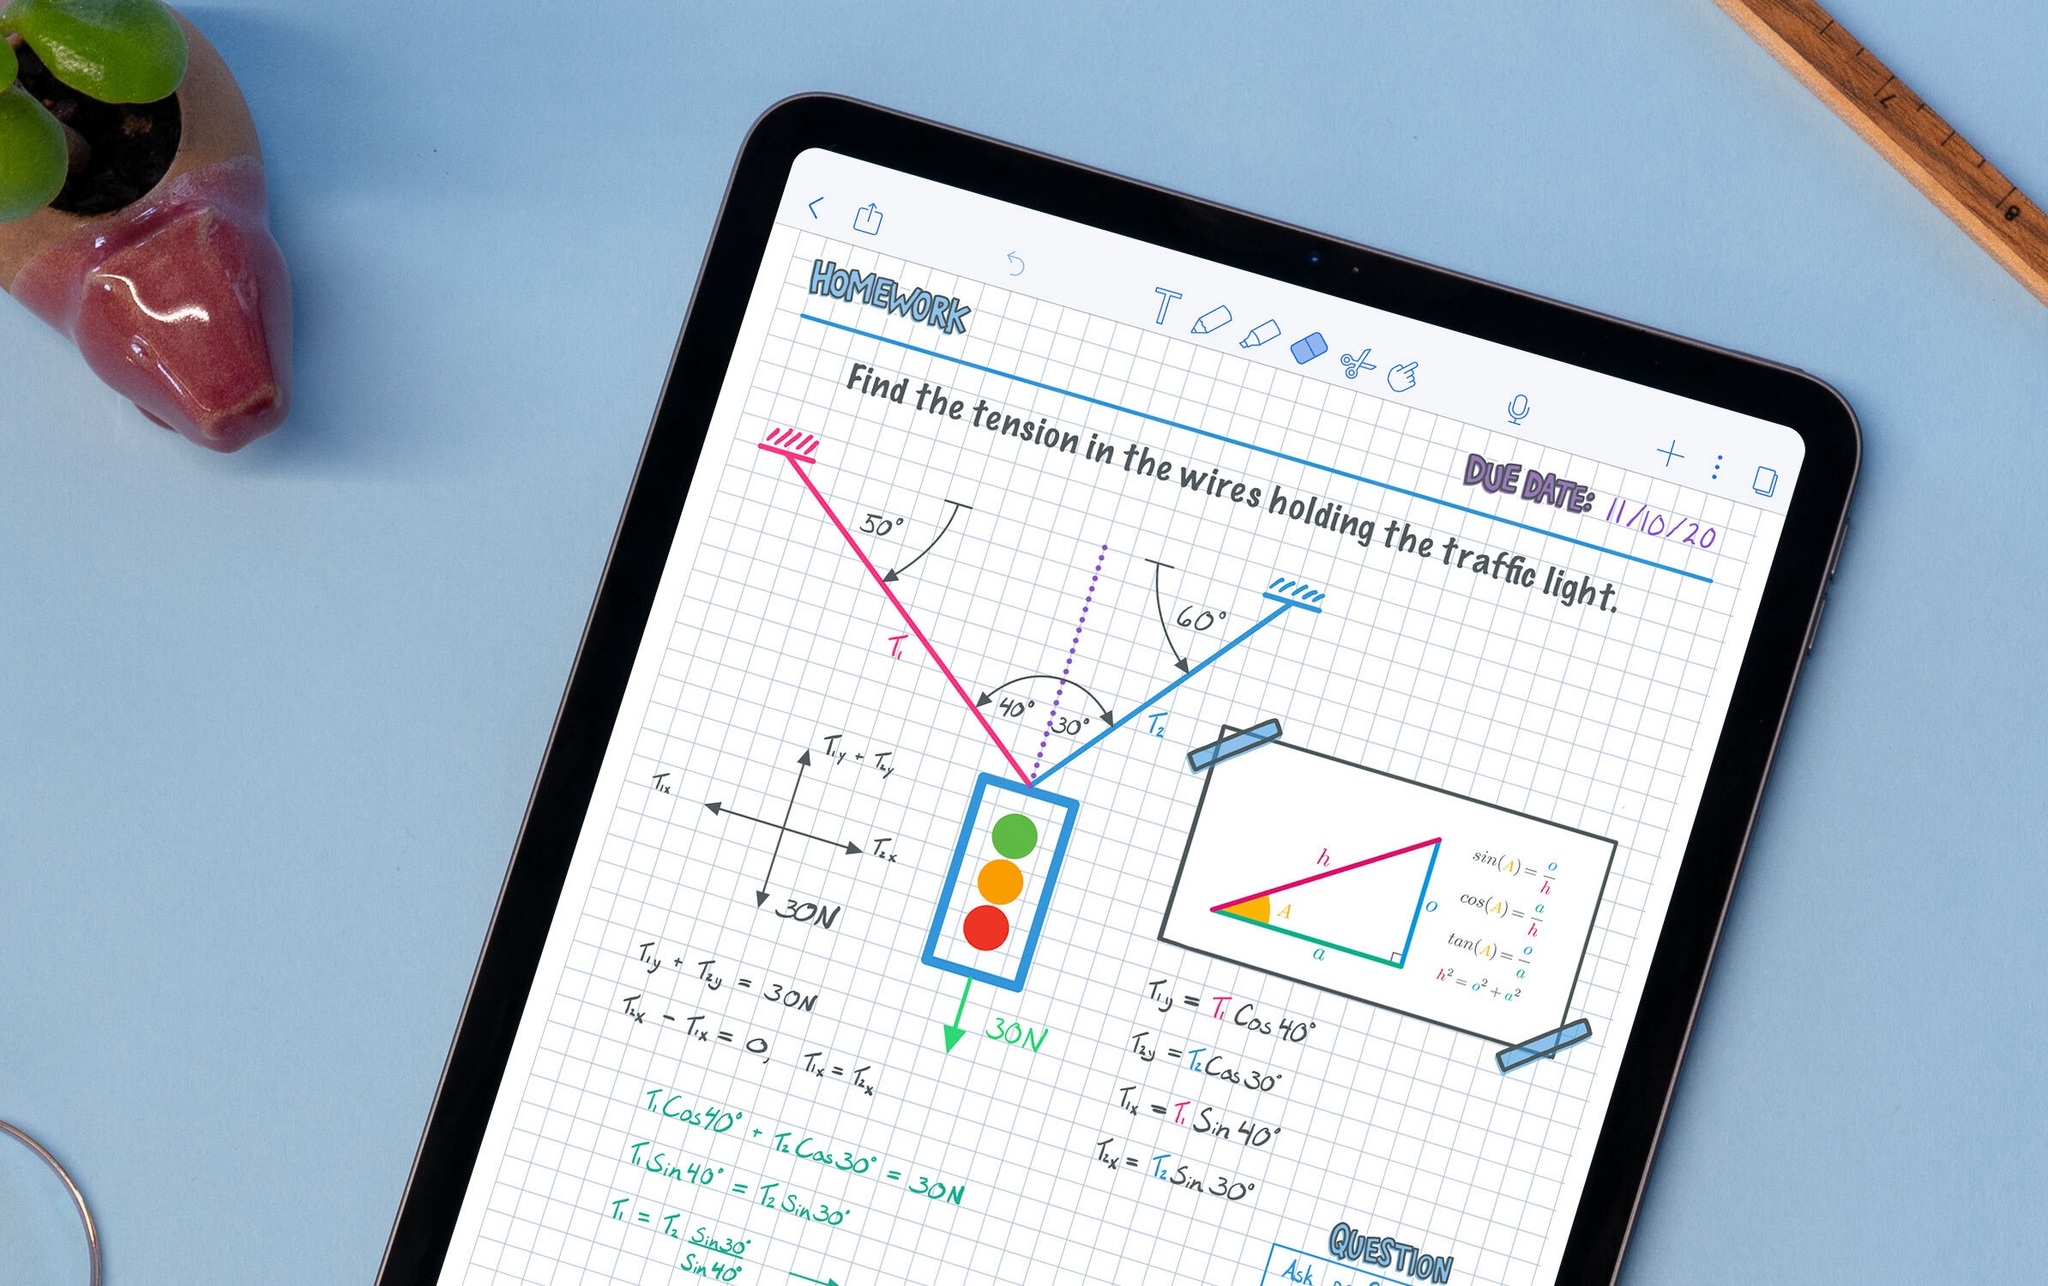 Best iPad apps for Apple Pencil: 16 brilliant art/note-taking apps